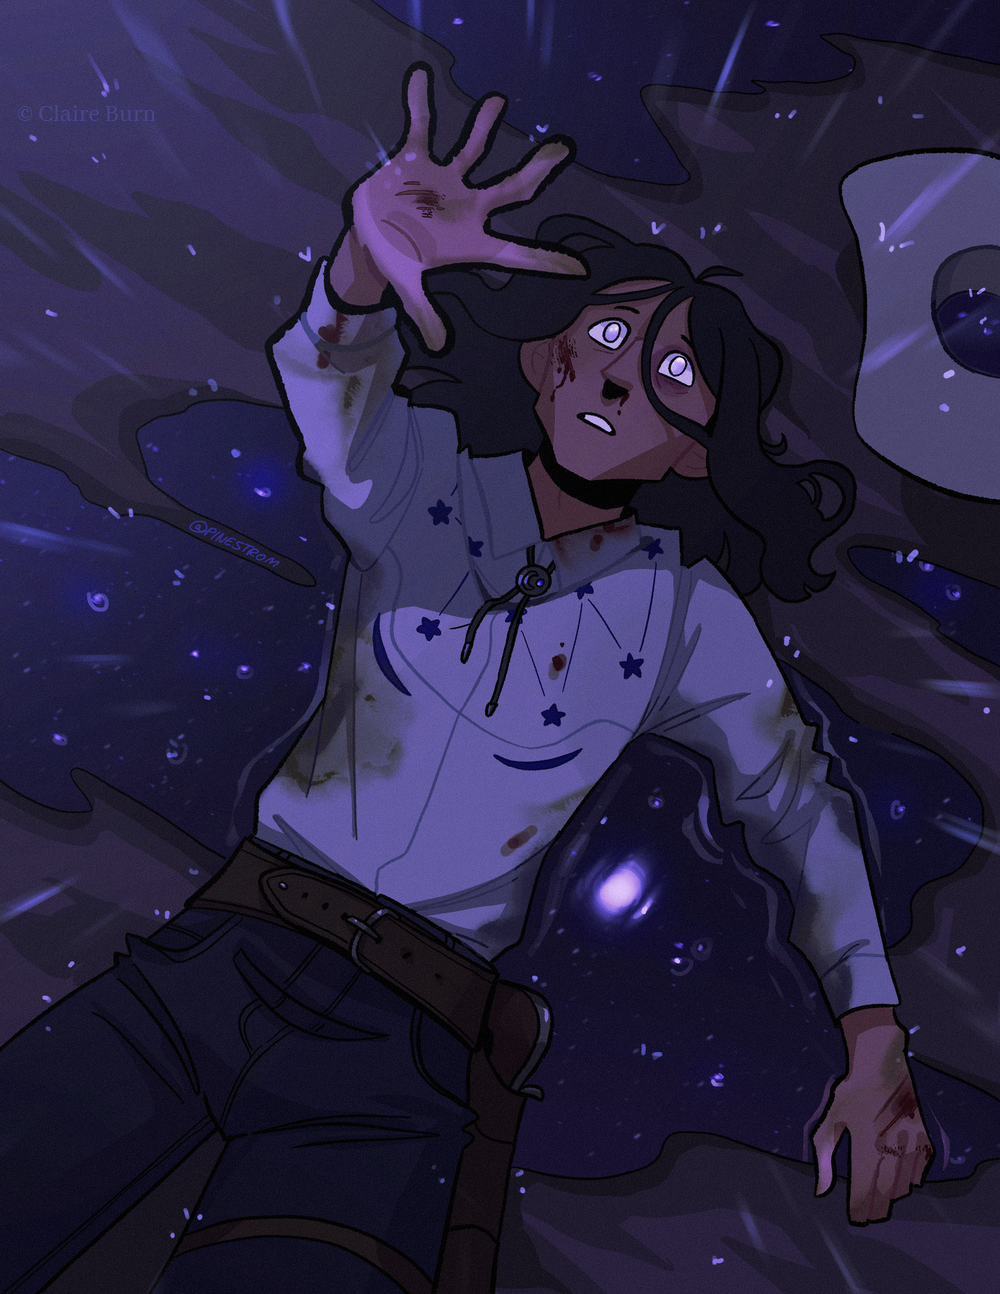 A man dressed in western clothing lies on the ground in a puddle as it rains, reaching up towards the stars.